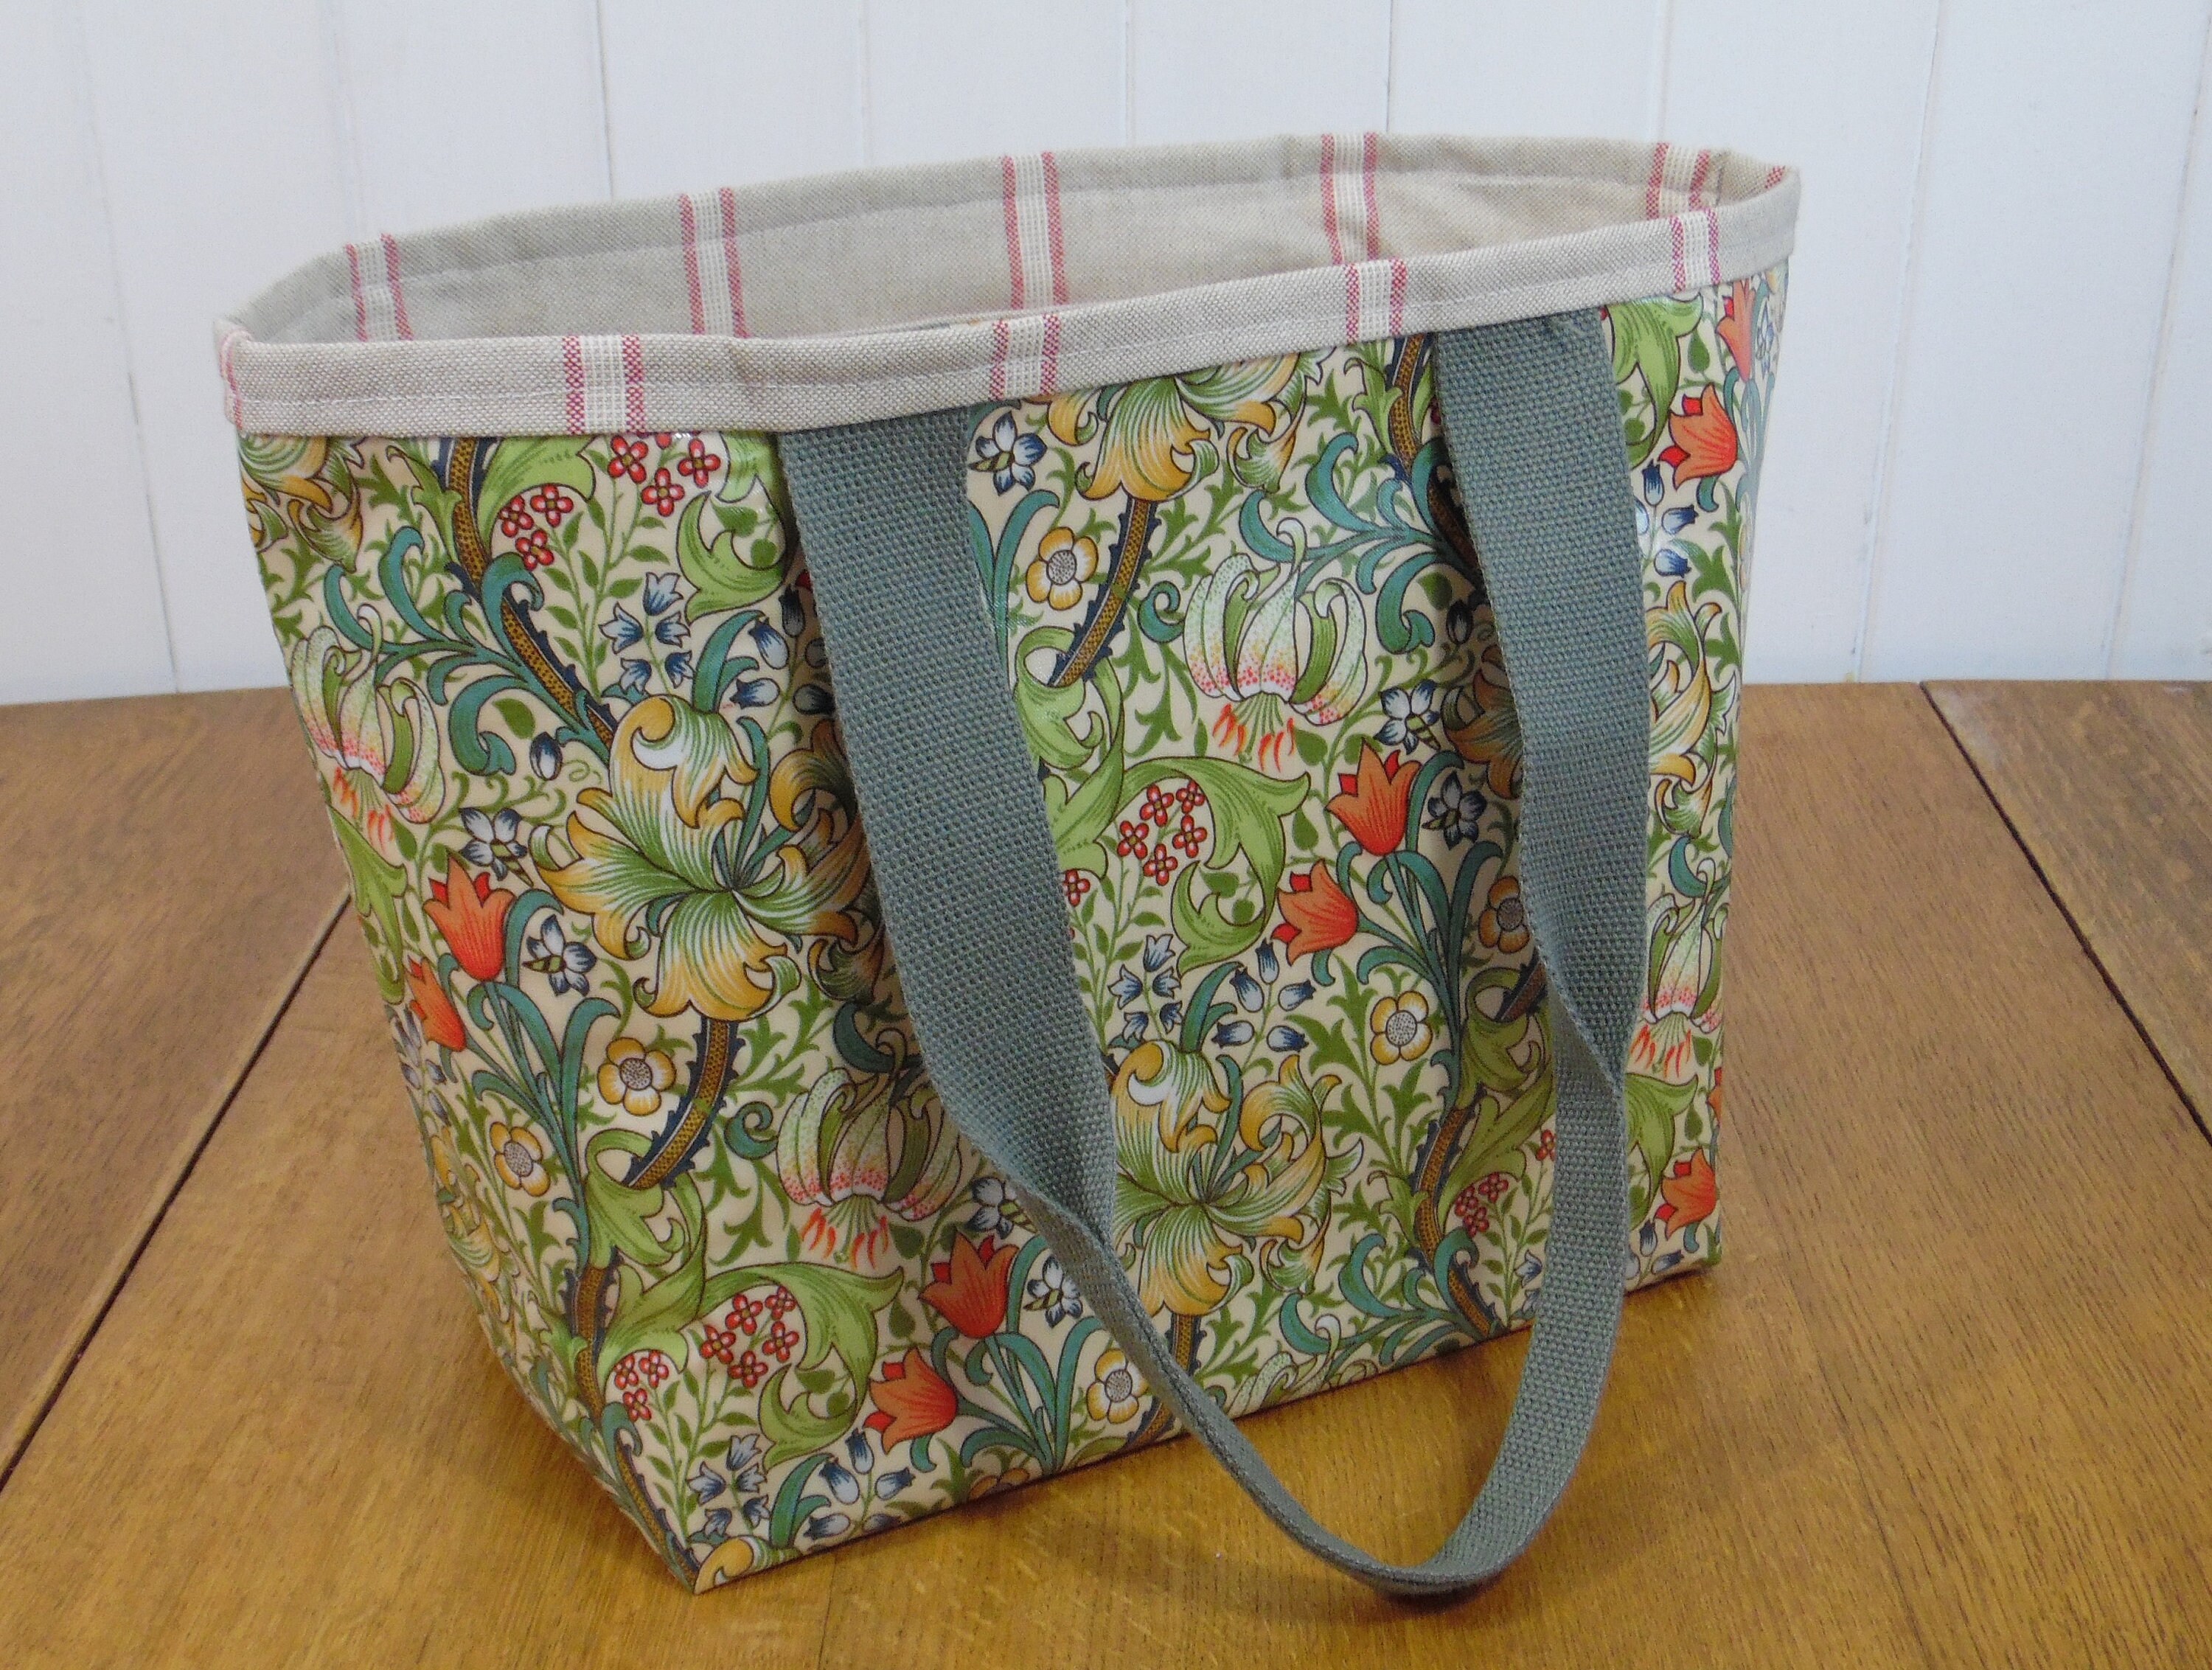 William Morris Golden Lily gloss finish oilcloth tote bag shopper ...